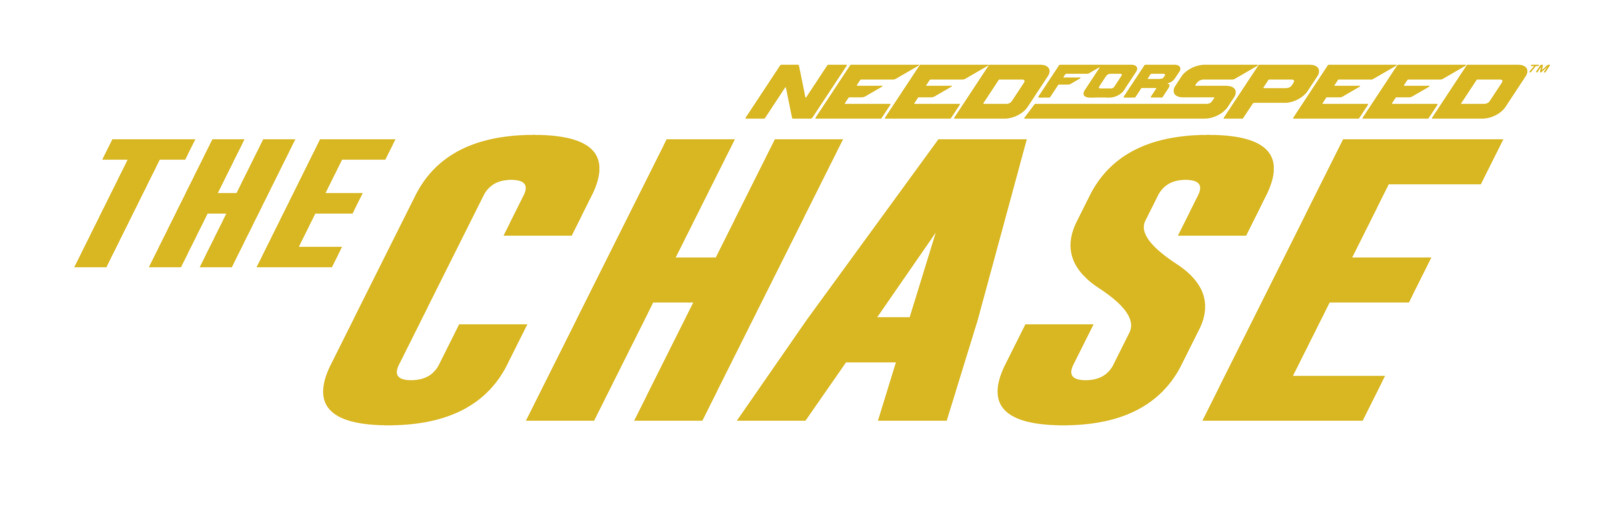 Need for Speed The Chase (Need for Speed Undercover in-development logo/name)